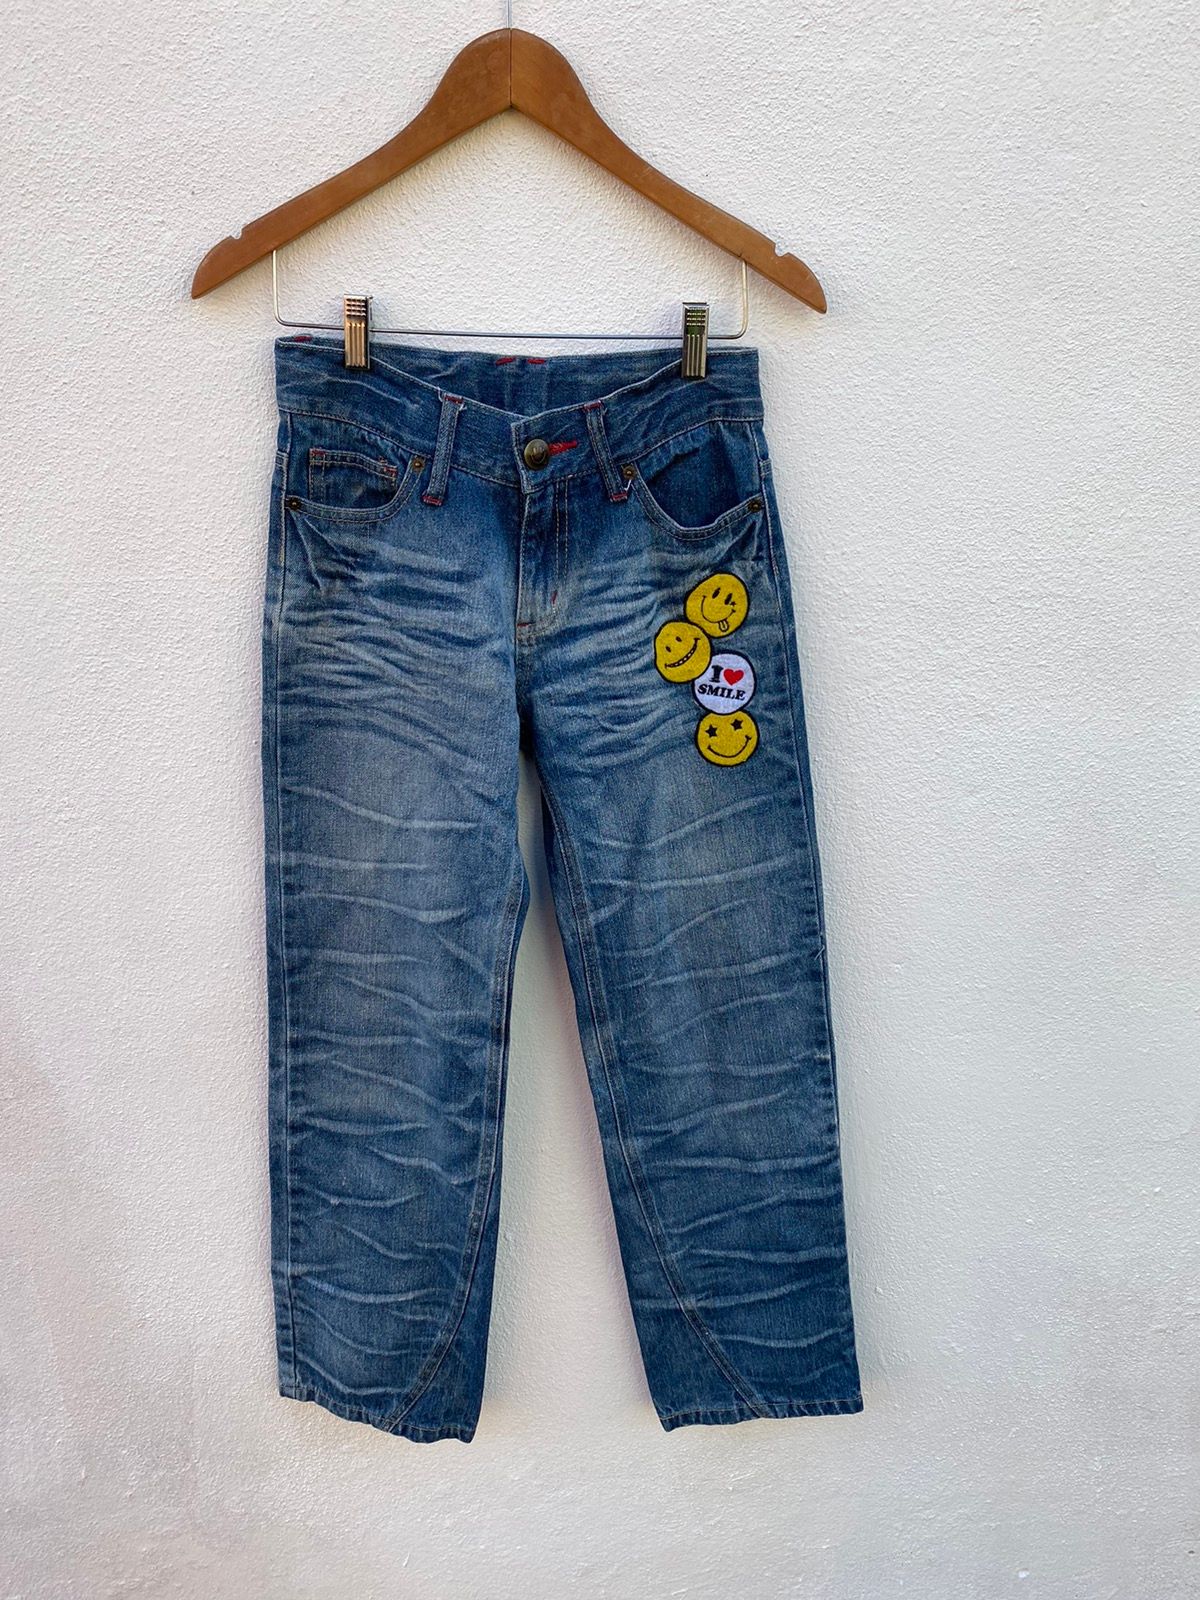 Japanese Brand Smiley Face Jeans Size US 28 / EU 44 - 1 Preview